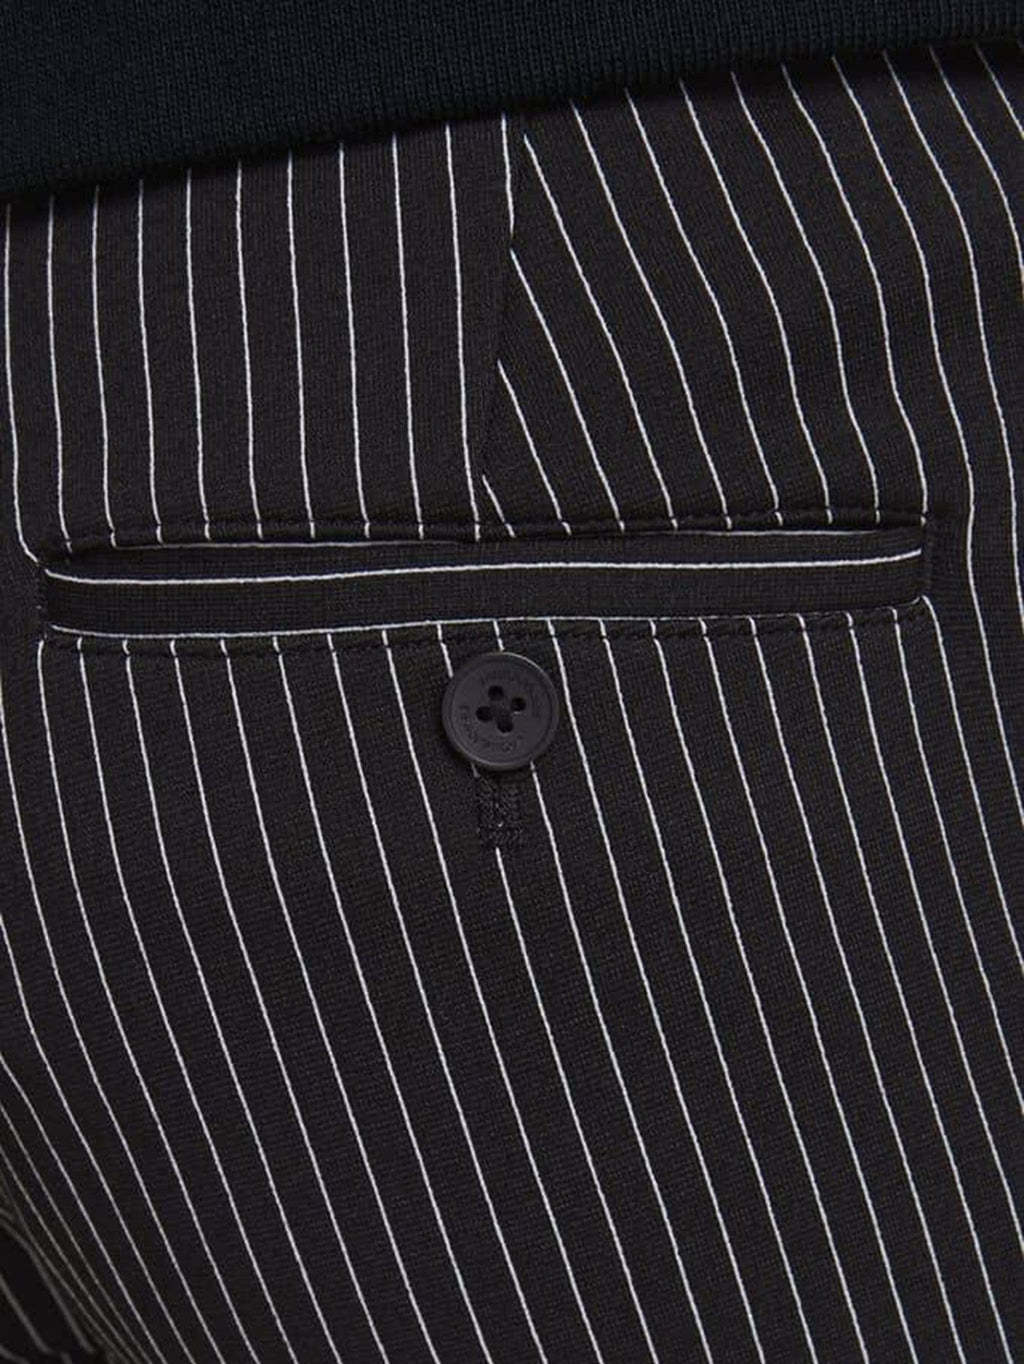 Marco Phil Pants - Black and white striped